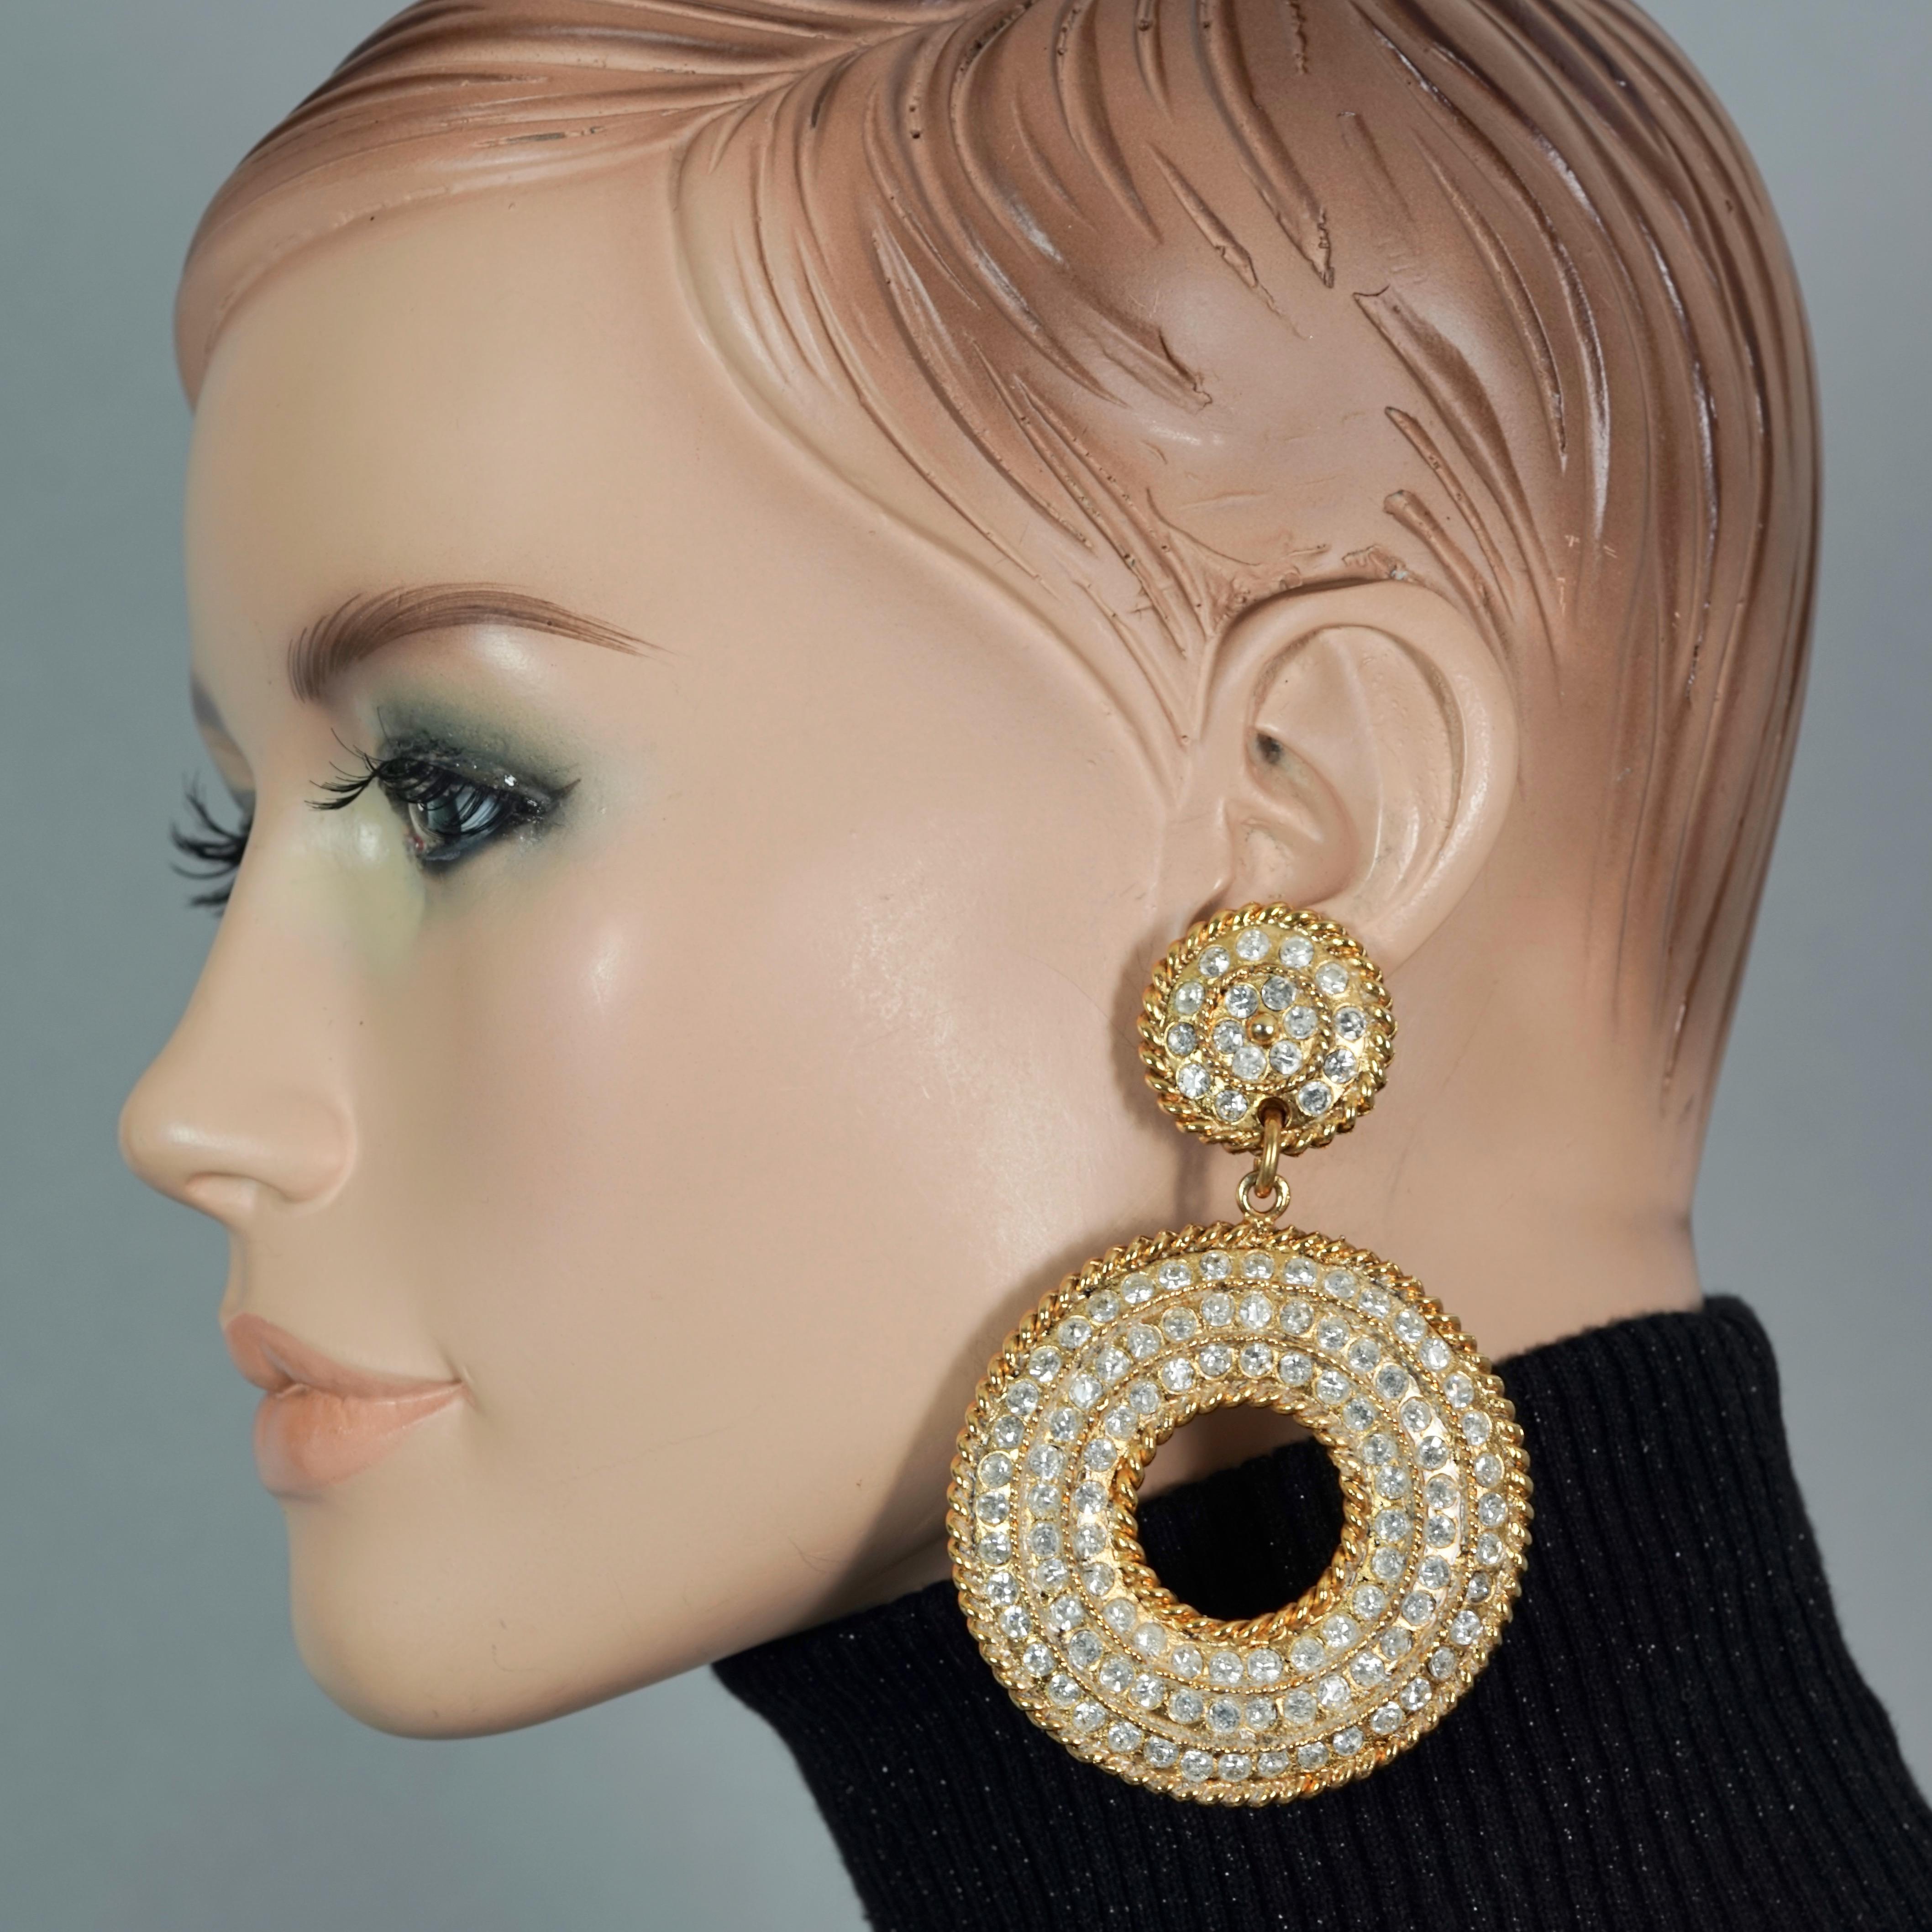 Vintage Massive EDOUARD RAMBAUD Rhinestone Hoop Dangling Earrings

Measurements:
Height: 3.46 inches (8.8 cm)
Width: 2.40 inches (6.1 cm)
Weight: 34 grams

Features:
- 100% Authentic EDOUARD RAMBAUD.
- Massive hoop dangling earrings studded with